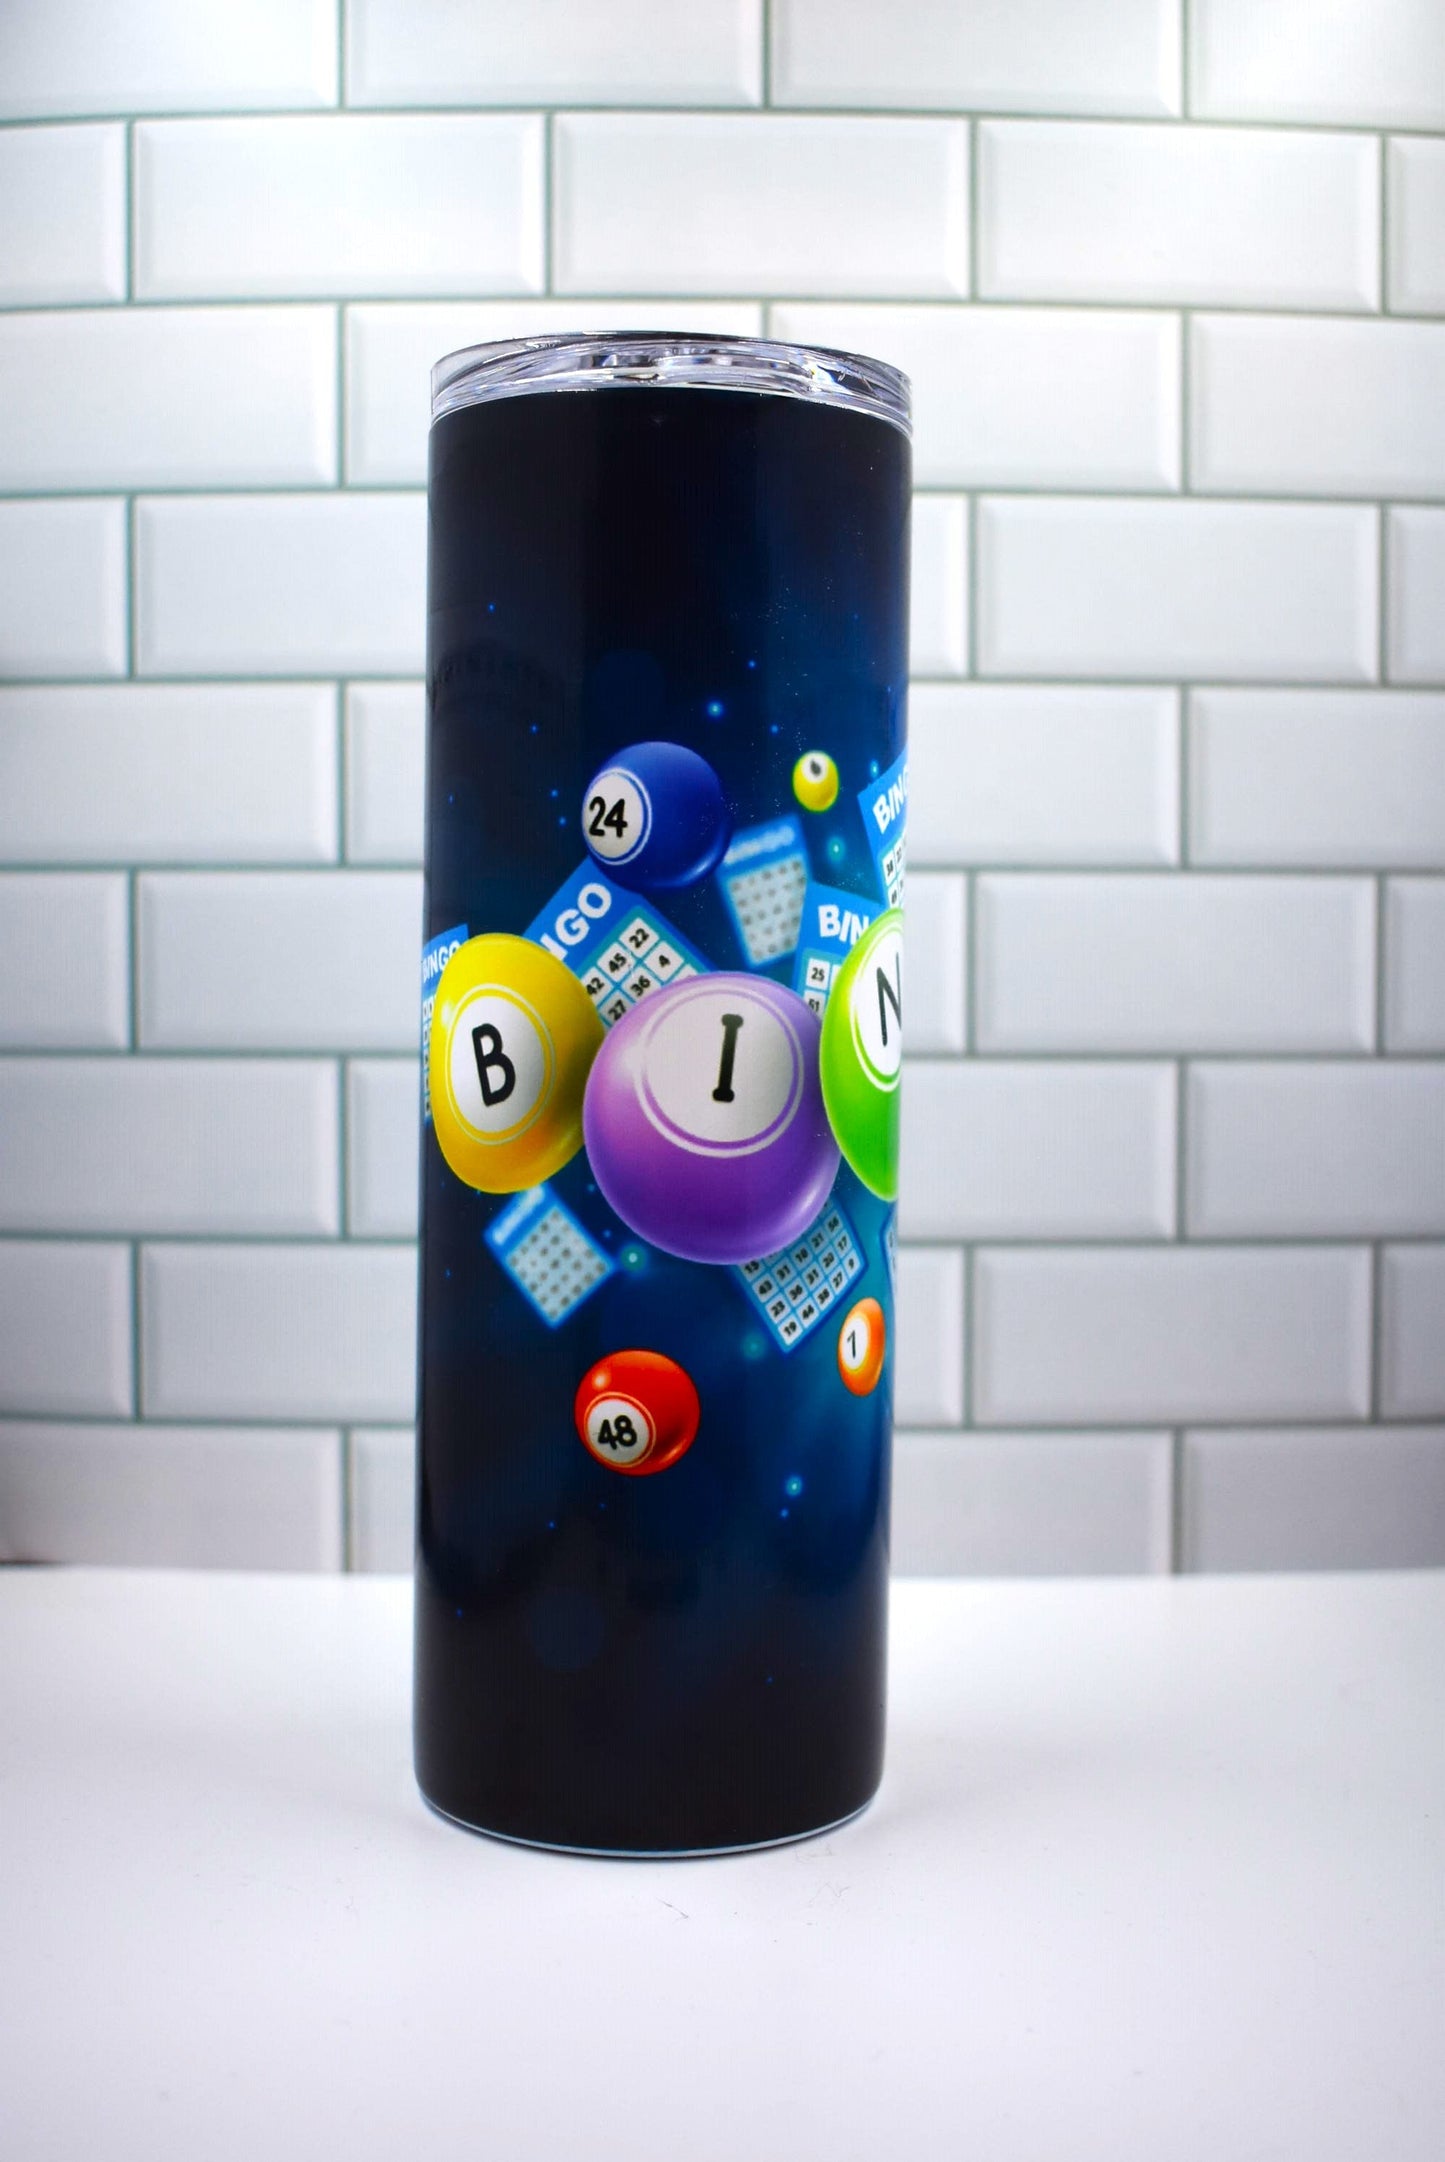 Boasting a 20 oz capacity and made from stainless steel and vacuumed insulated material, this Makerflo tumbler features the classic BINGO! image along with the iconic numbered ping pong balls. 